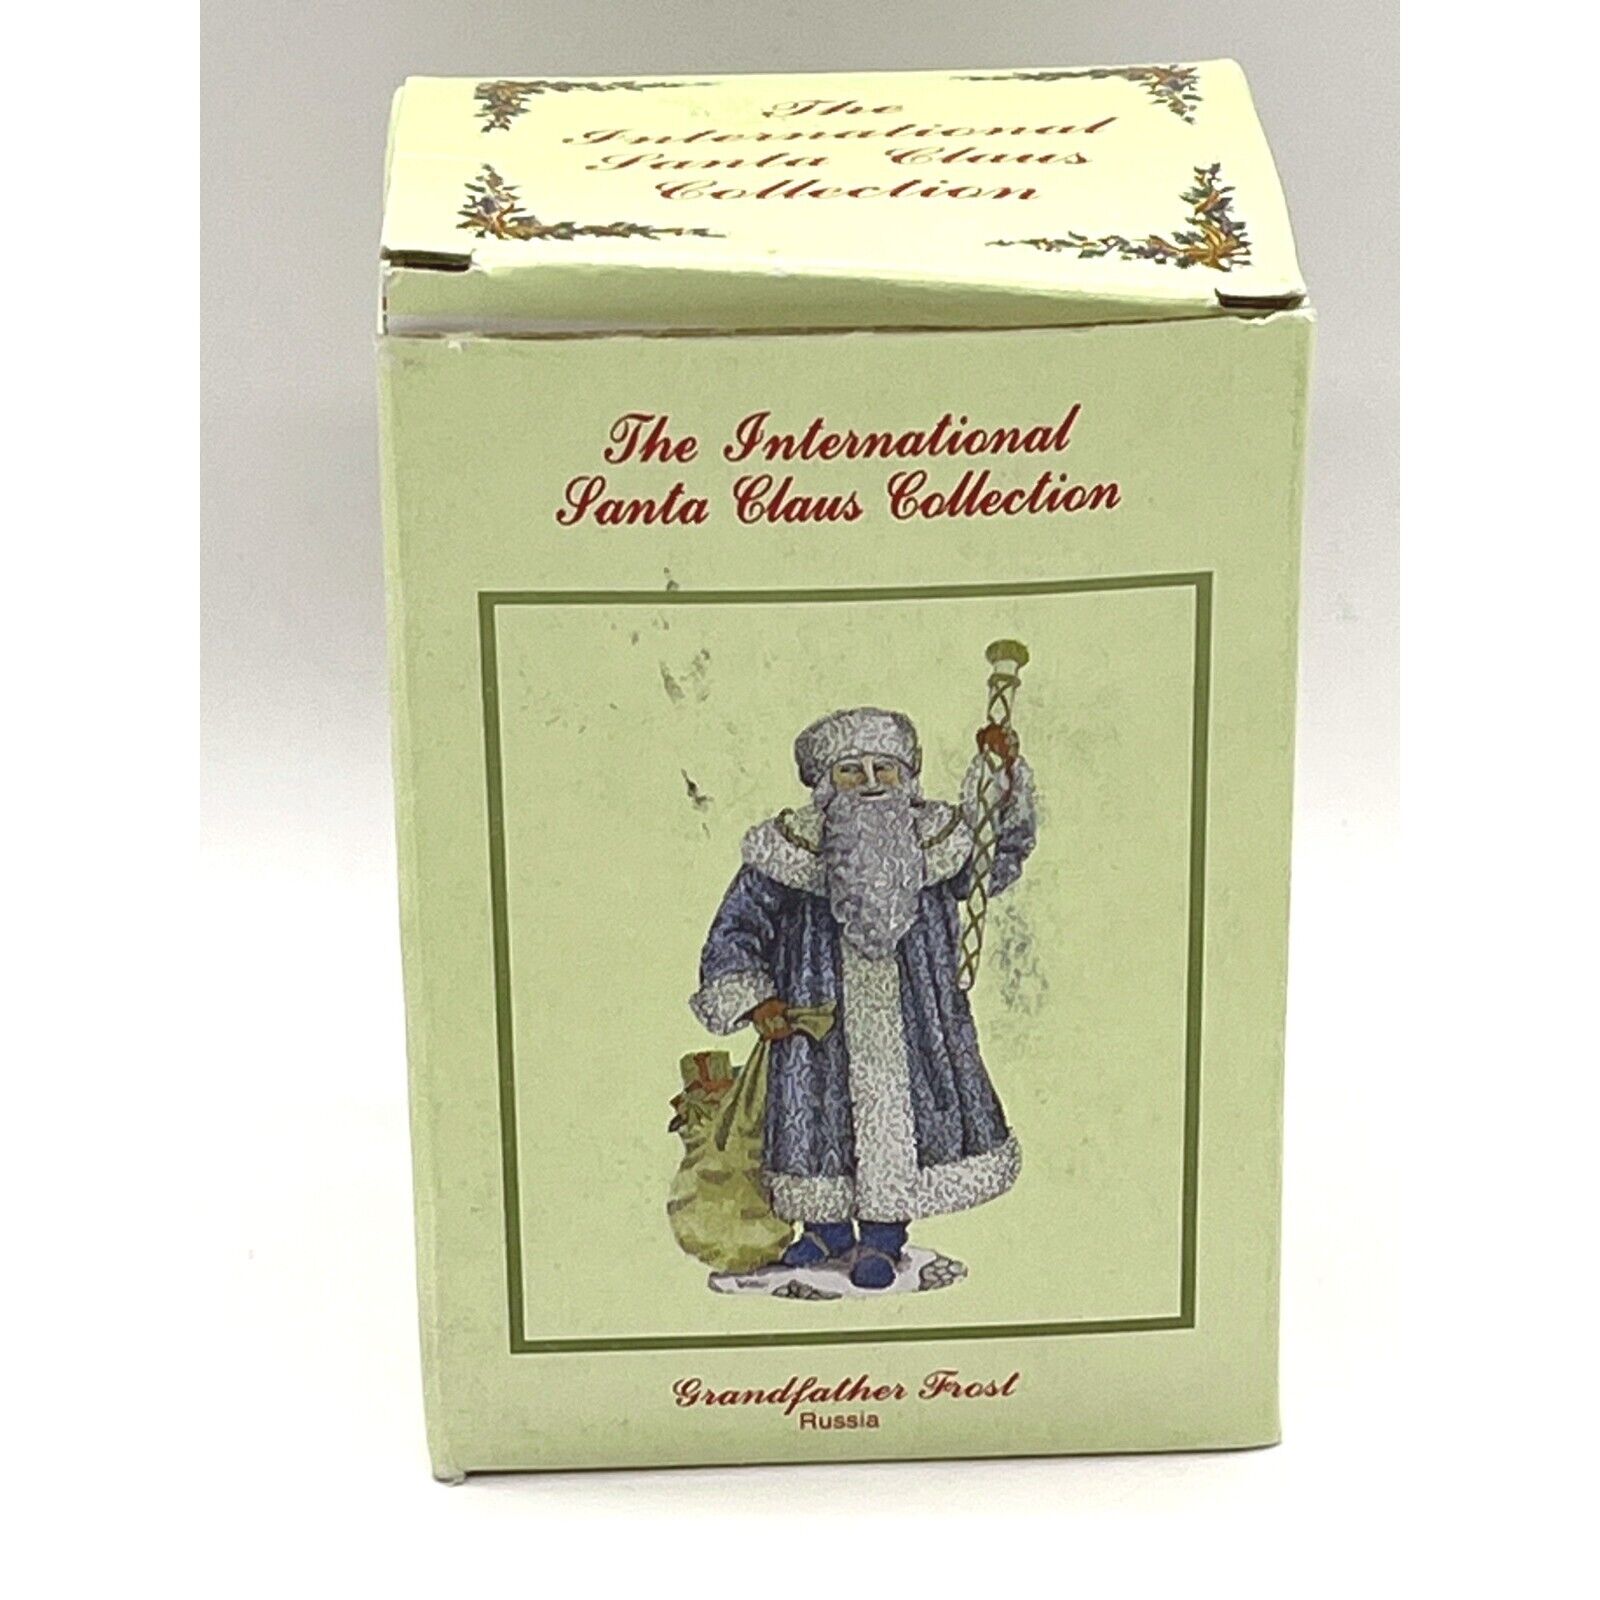 Vintage The International Santa Claus Collection Grandfather Frost Russia 1993